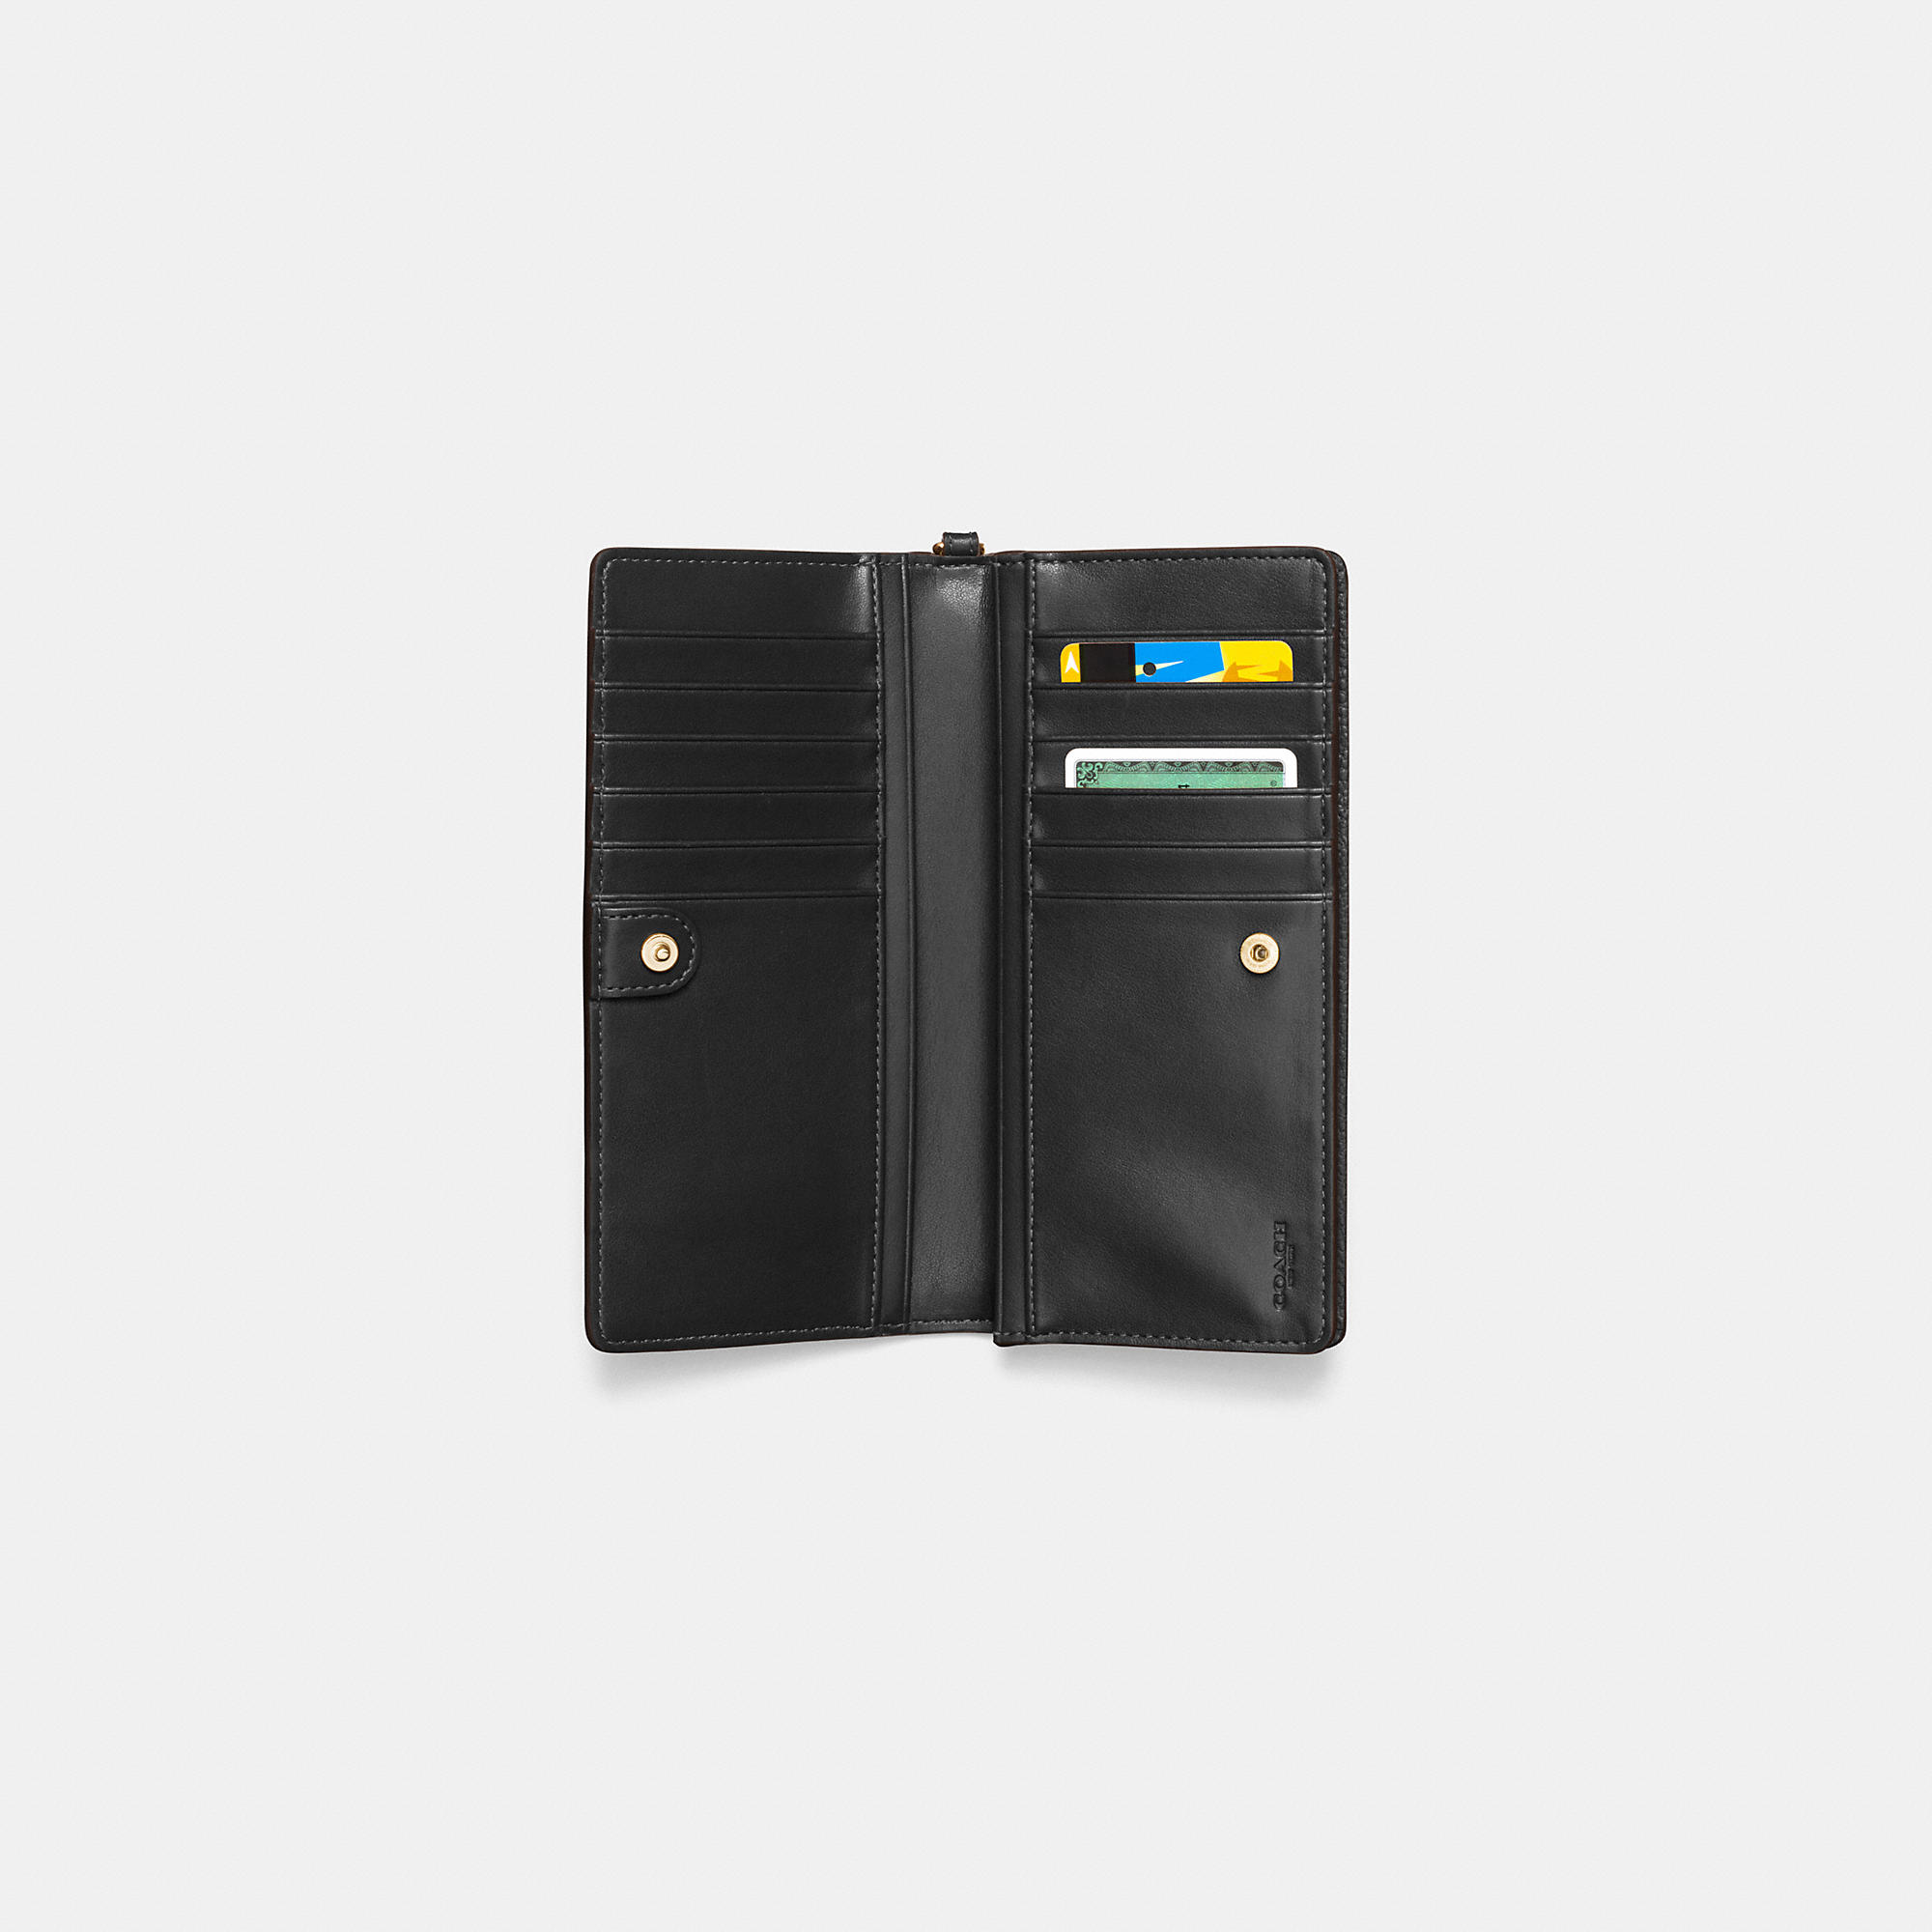 High Quality Brand Coach Slim Wallet In Pebble Leather